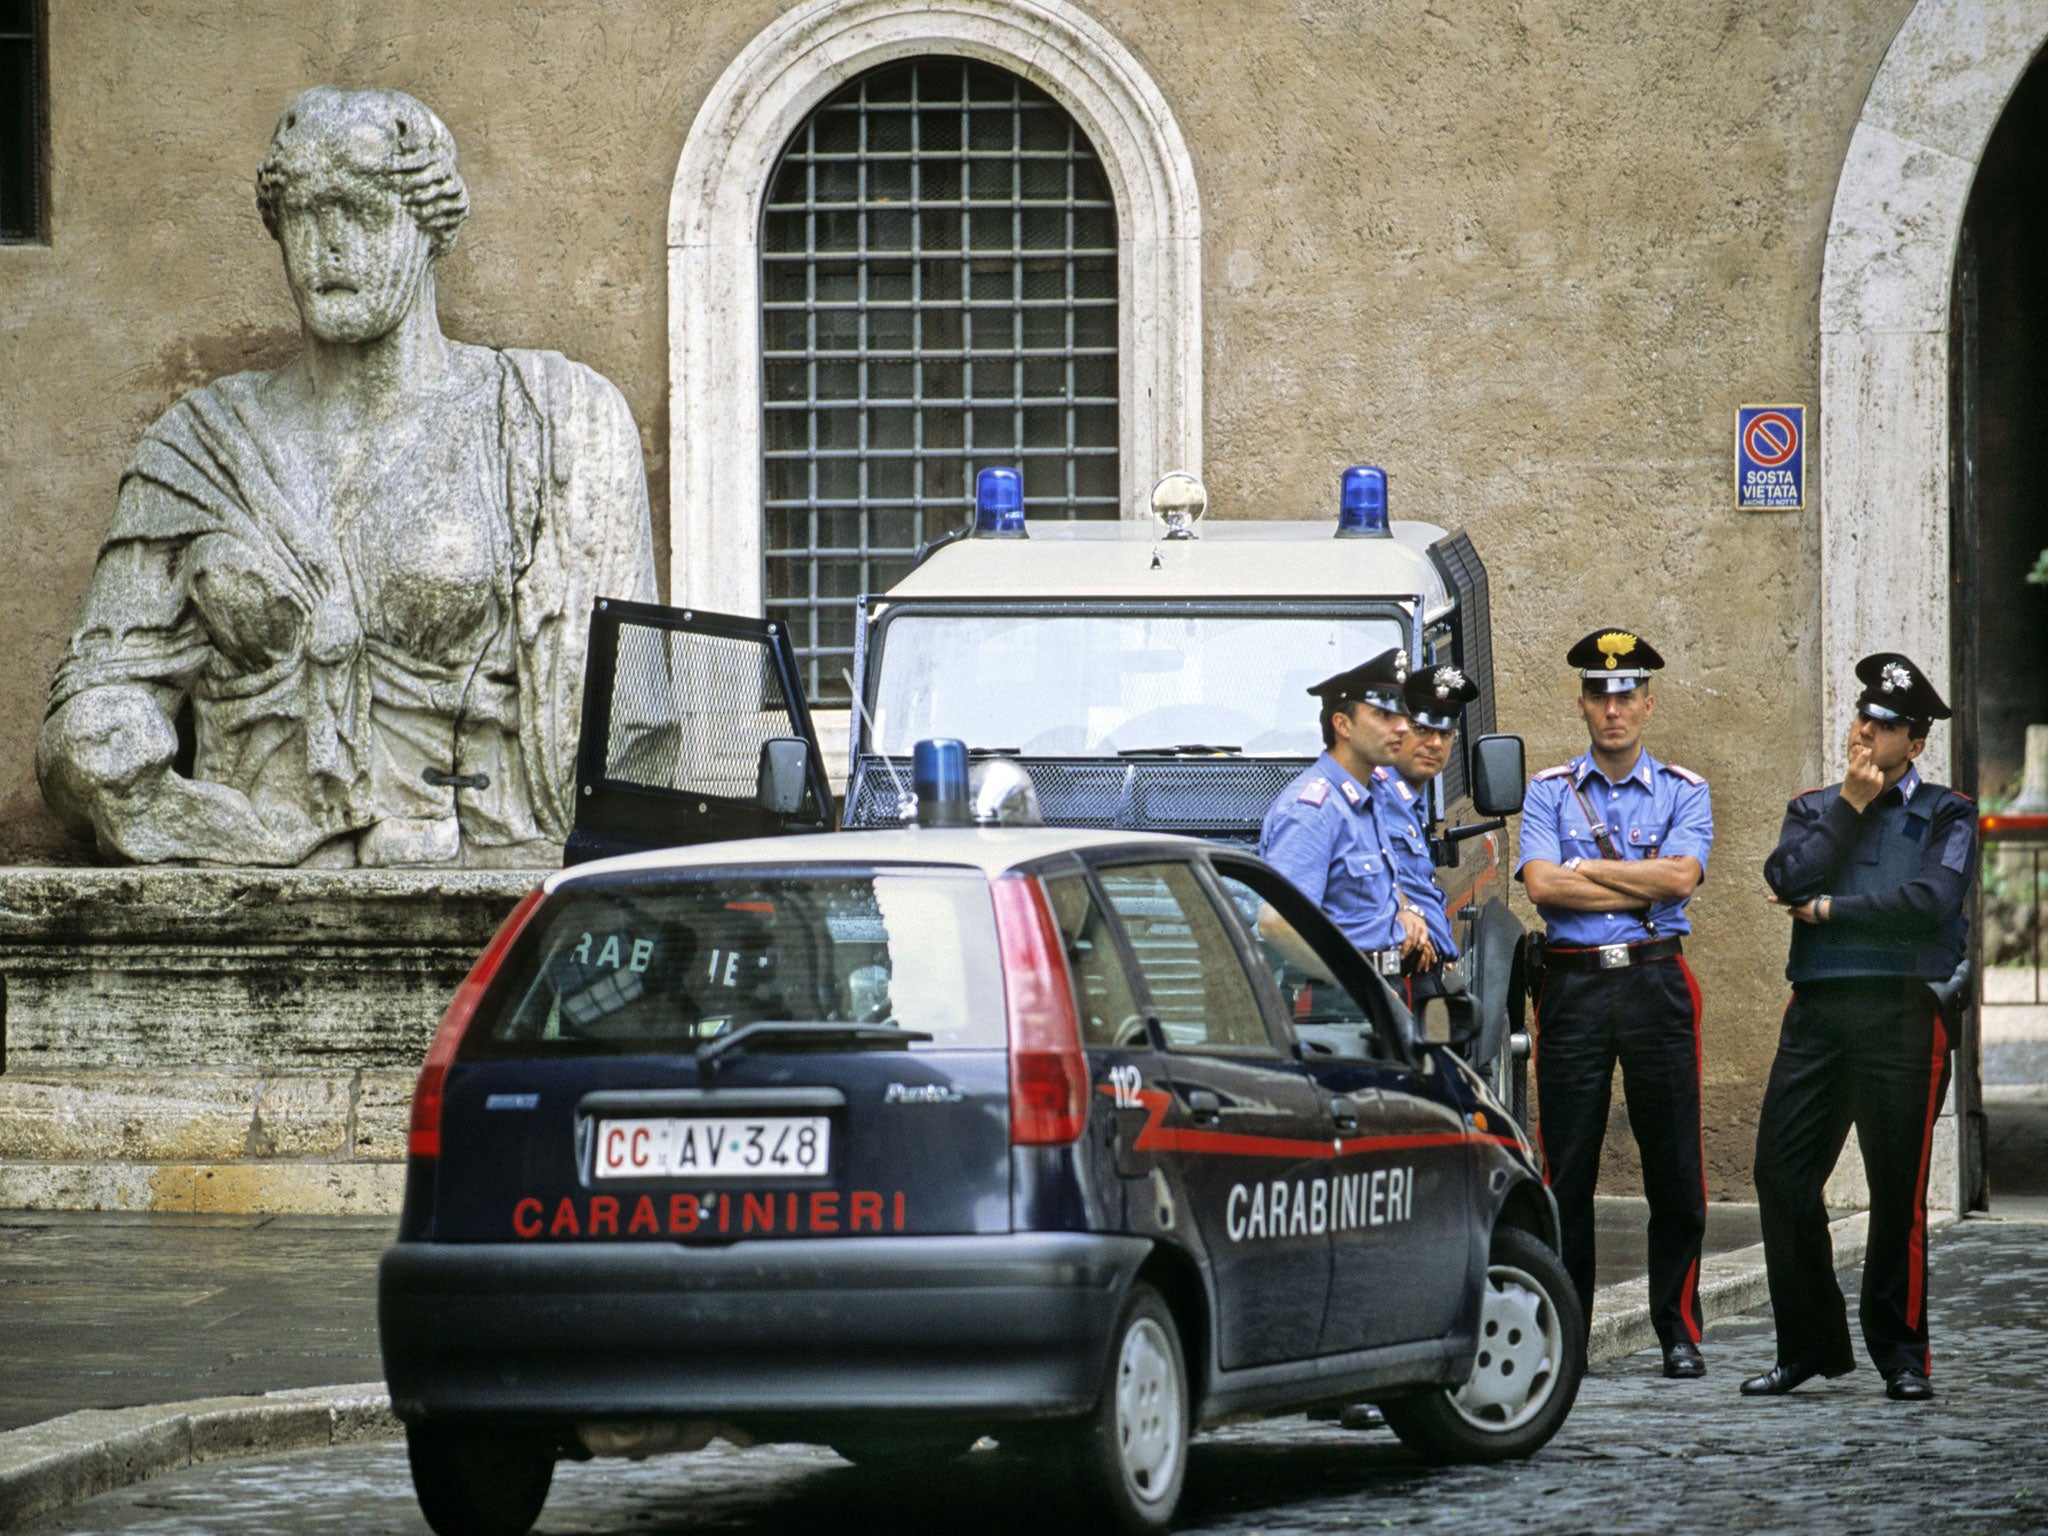 A Carabinieri officer told the court: ‘The body was visible from the door, naked and face down with his hands behind his back. There was an electrical cord round his neck.’